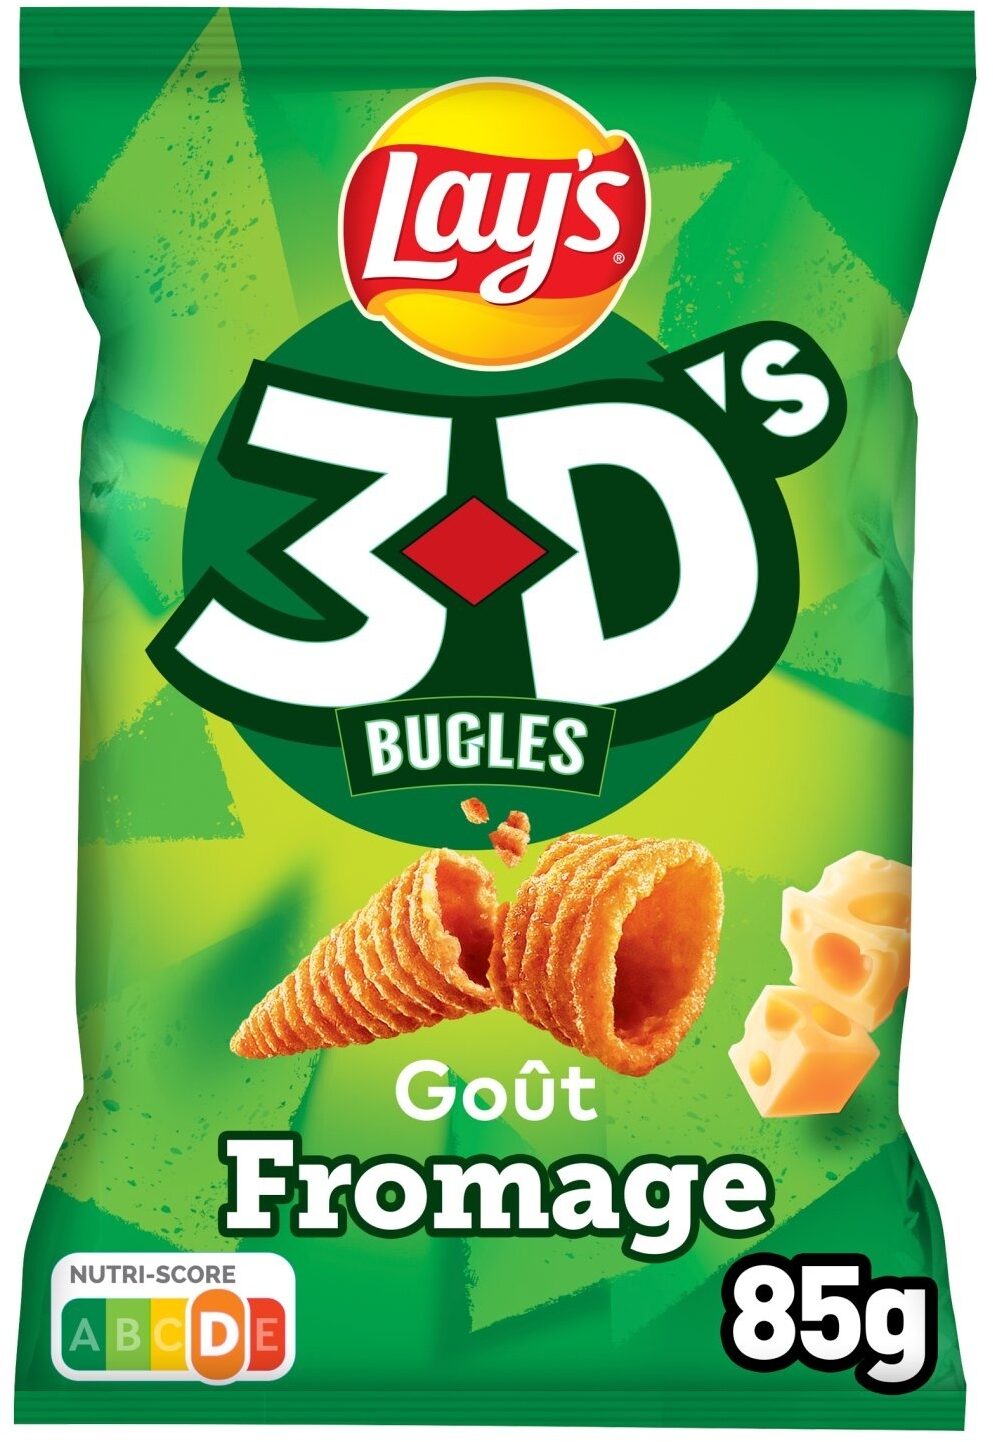 Lay's 3D's Bugles goût fromage - Product - fr